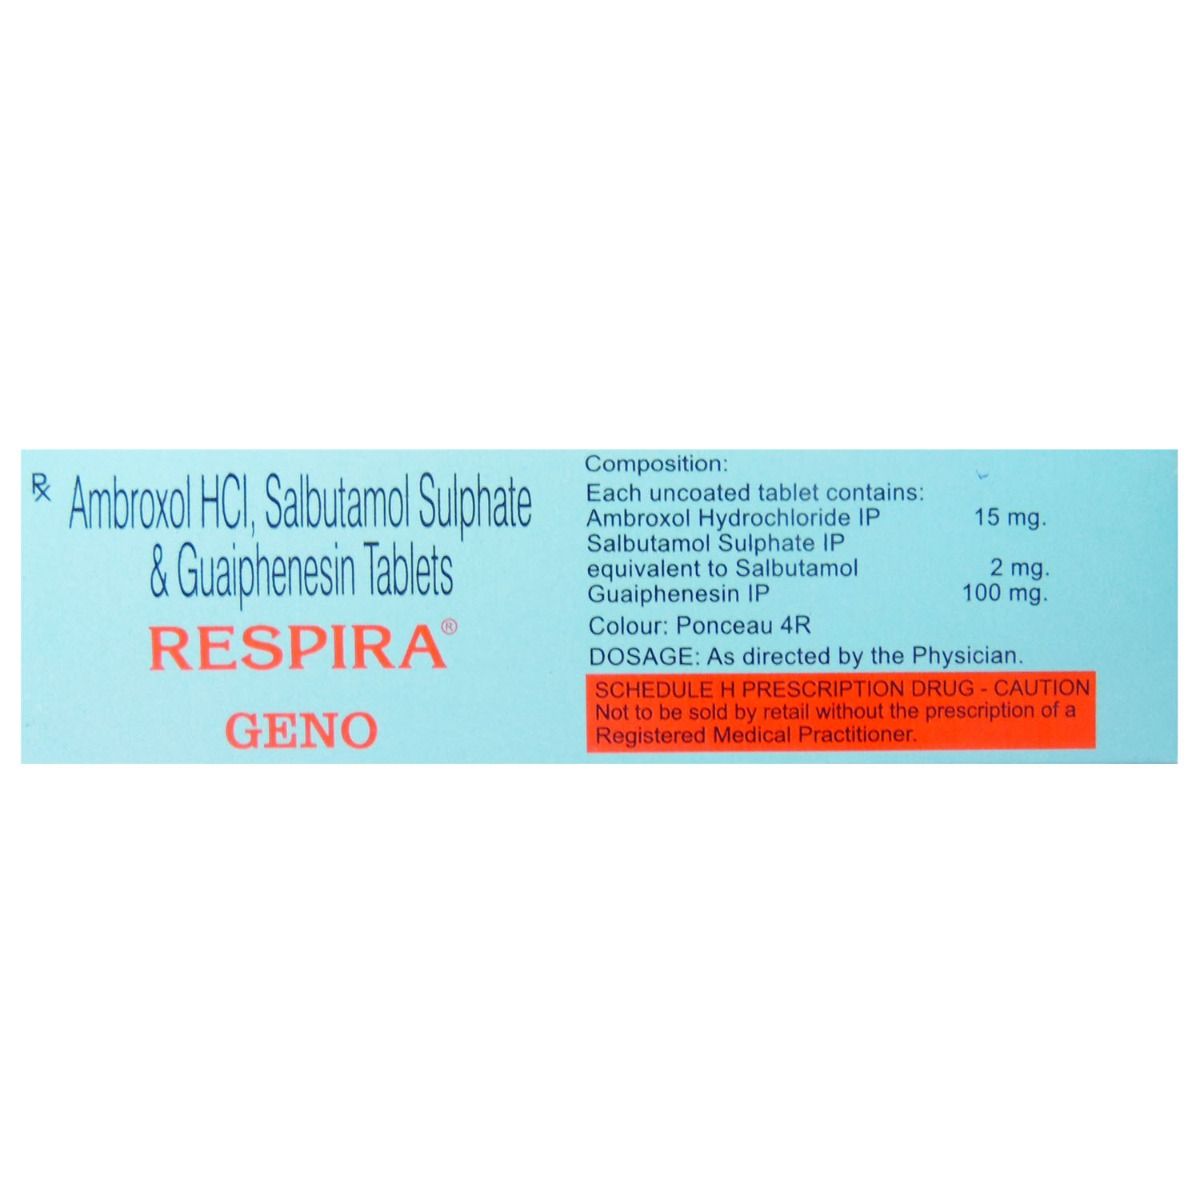 Respira Tablet 10's, Pack of 10 TabletS